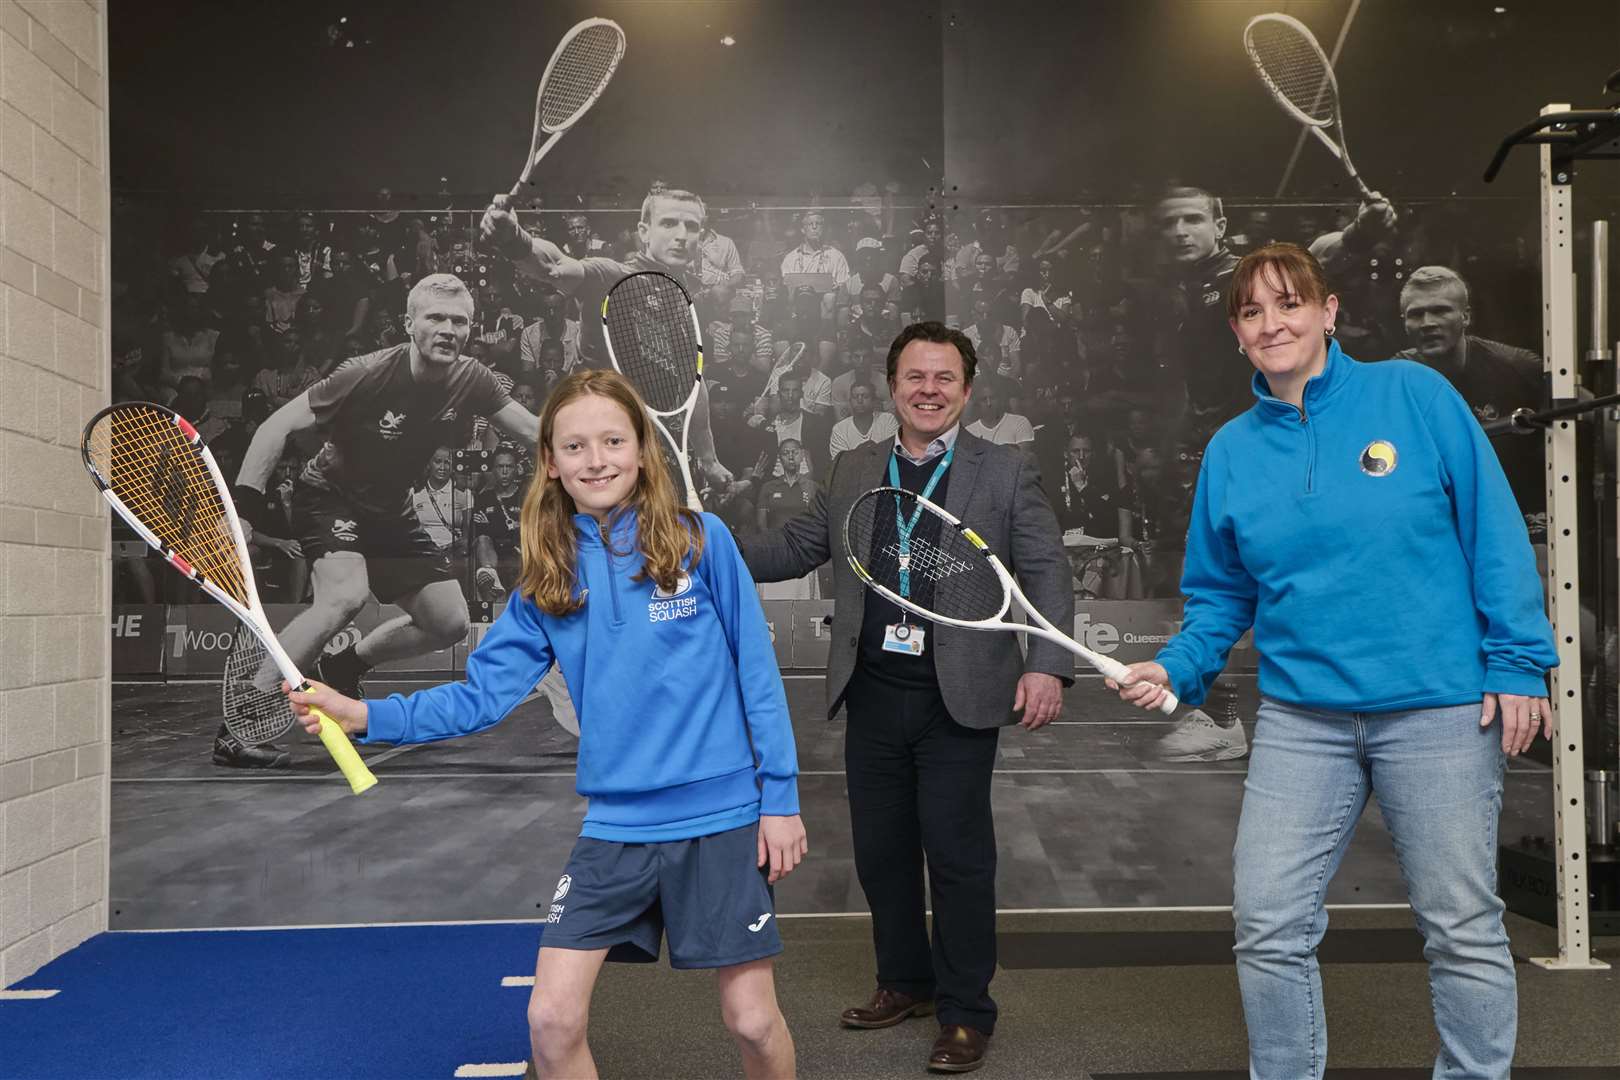 From left: junior squash player Zac Paton, Steve Walsh the chief executive of High Life Highland and Ailsa Polworth, manager of Inverness Tennis and Squash Club.